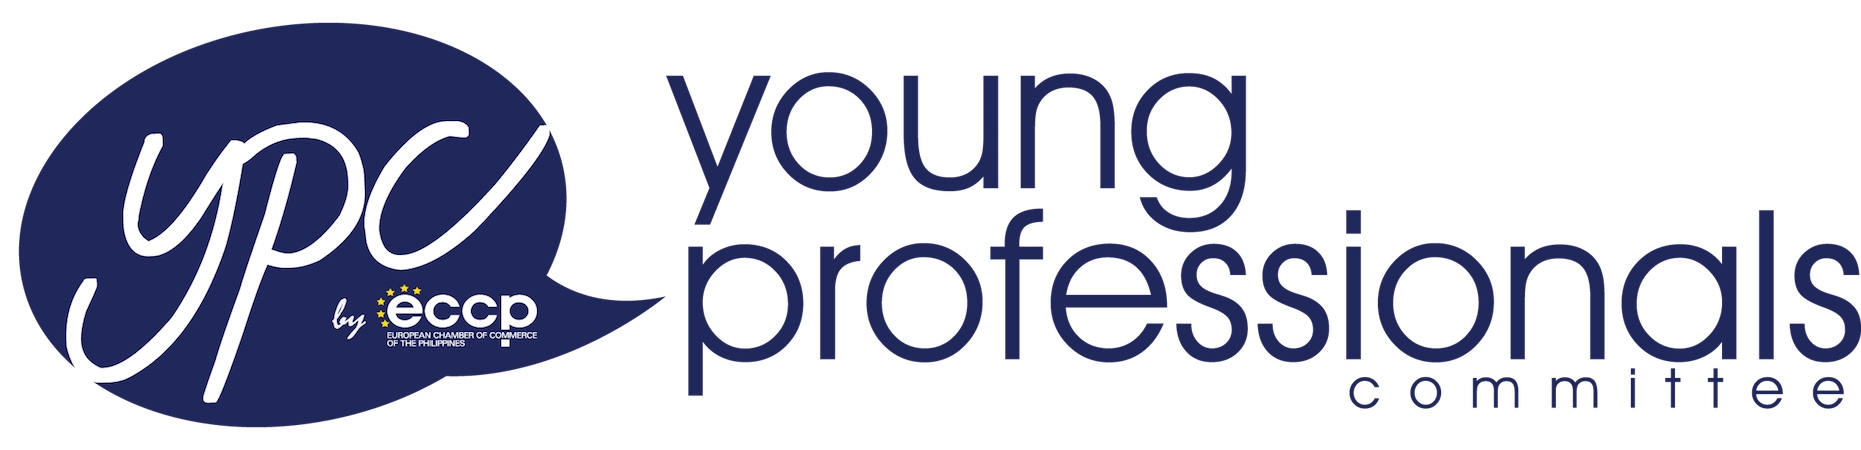 Young Professionals Committee